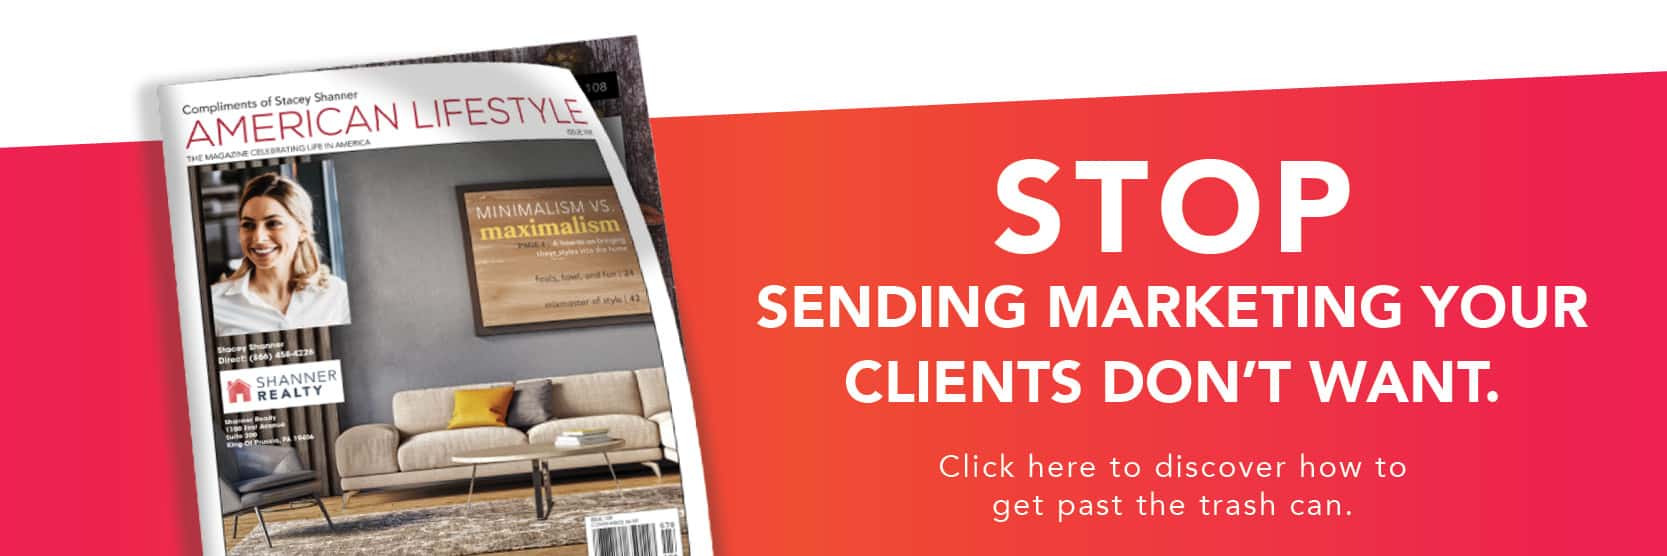 Ad insert. Stop sending marketing your clients don't want. Click here to discover how to get past the trash can.